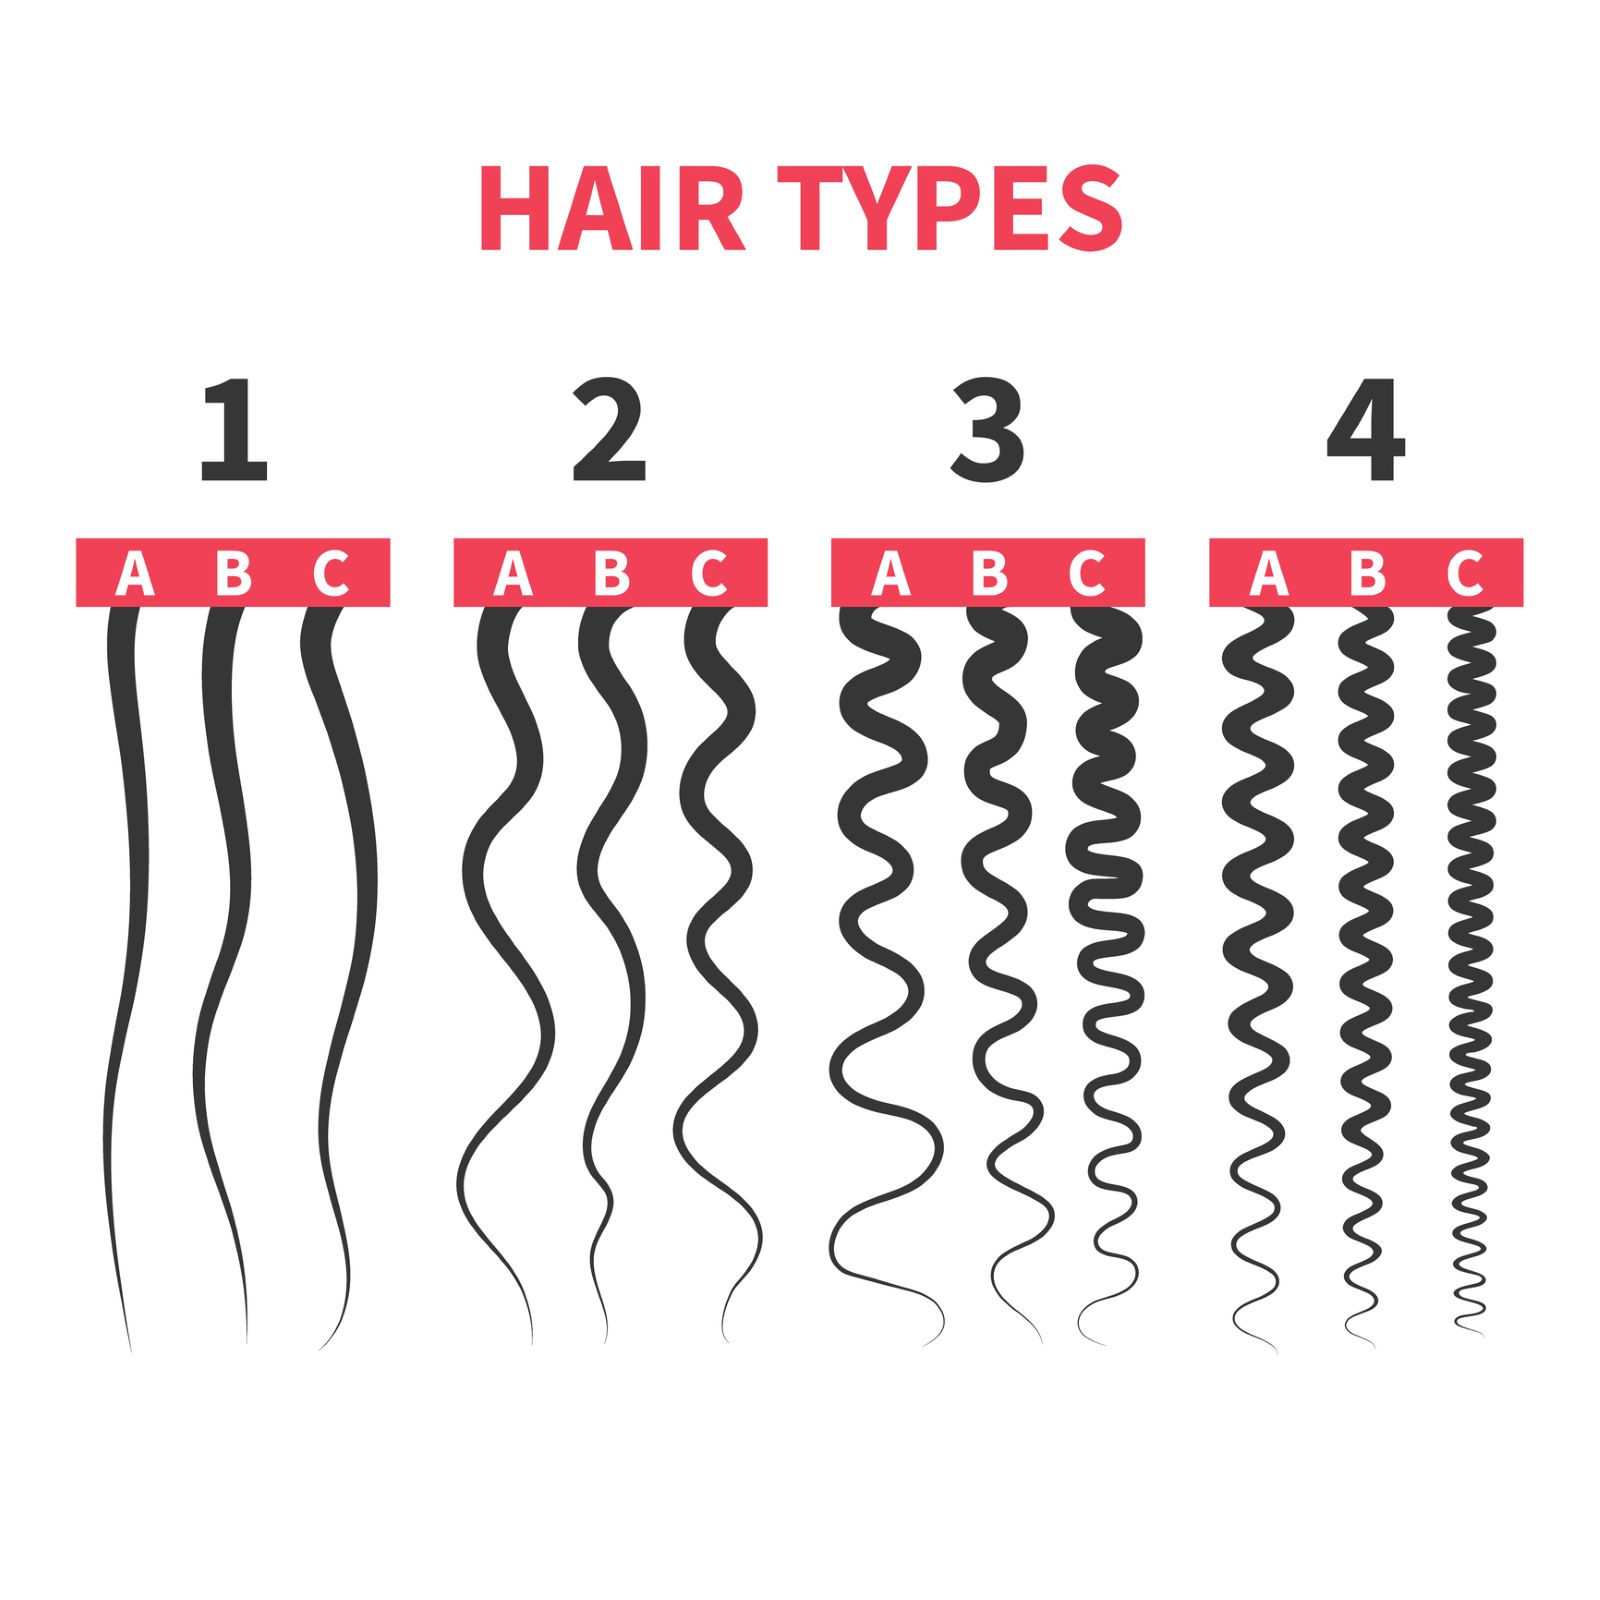 Hair type chart from 1a to 4c hair